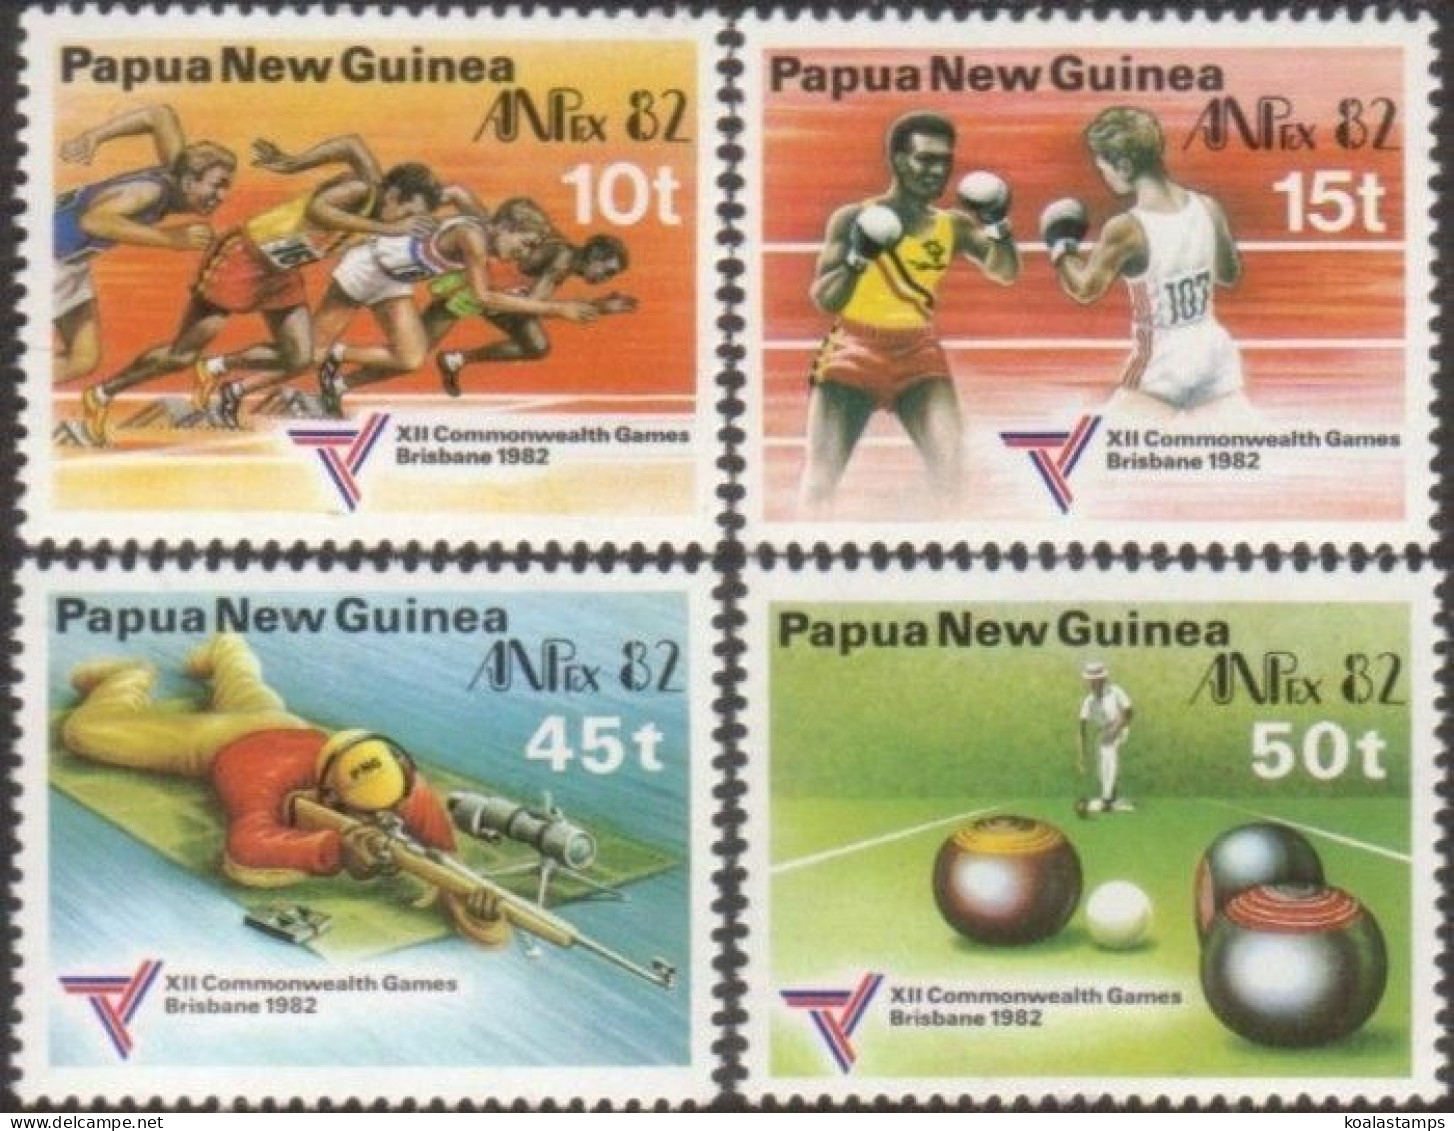 Papua New Guinea 1982 SG460-463 XII Commonwealth Games Set MNH - Papouasie-Nouvelle-Guinée